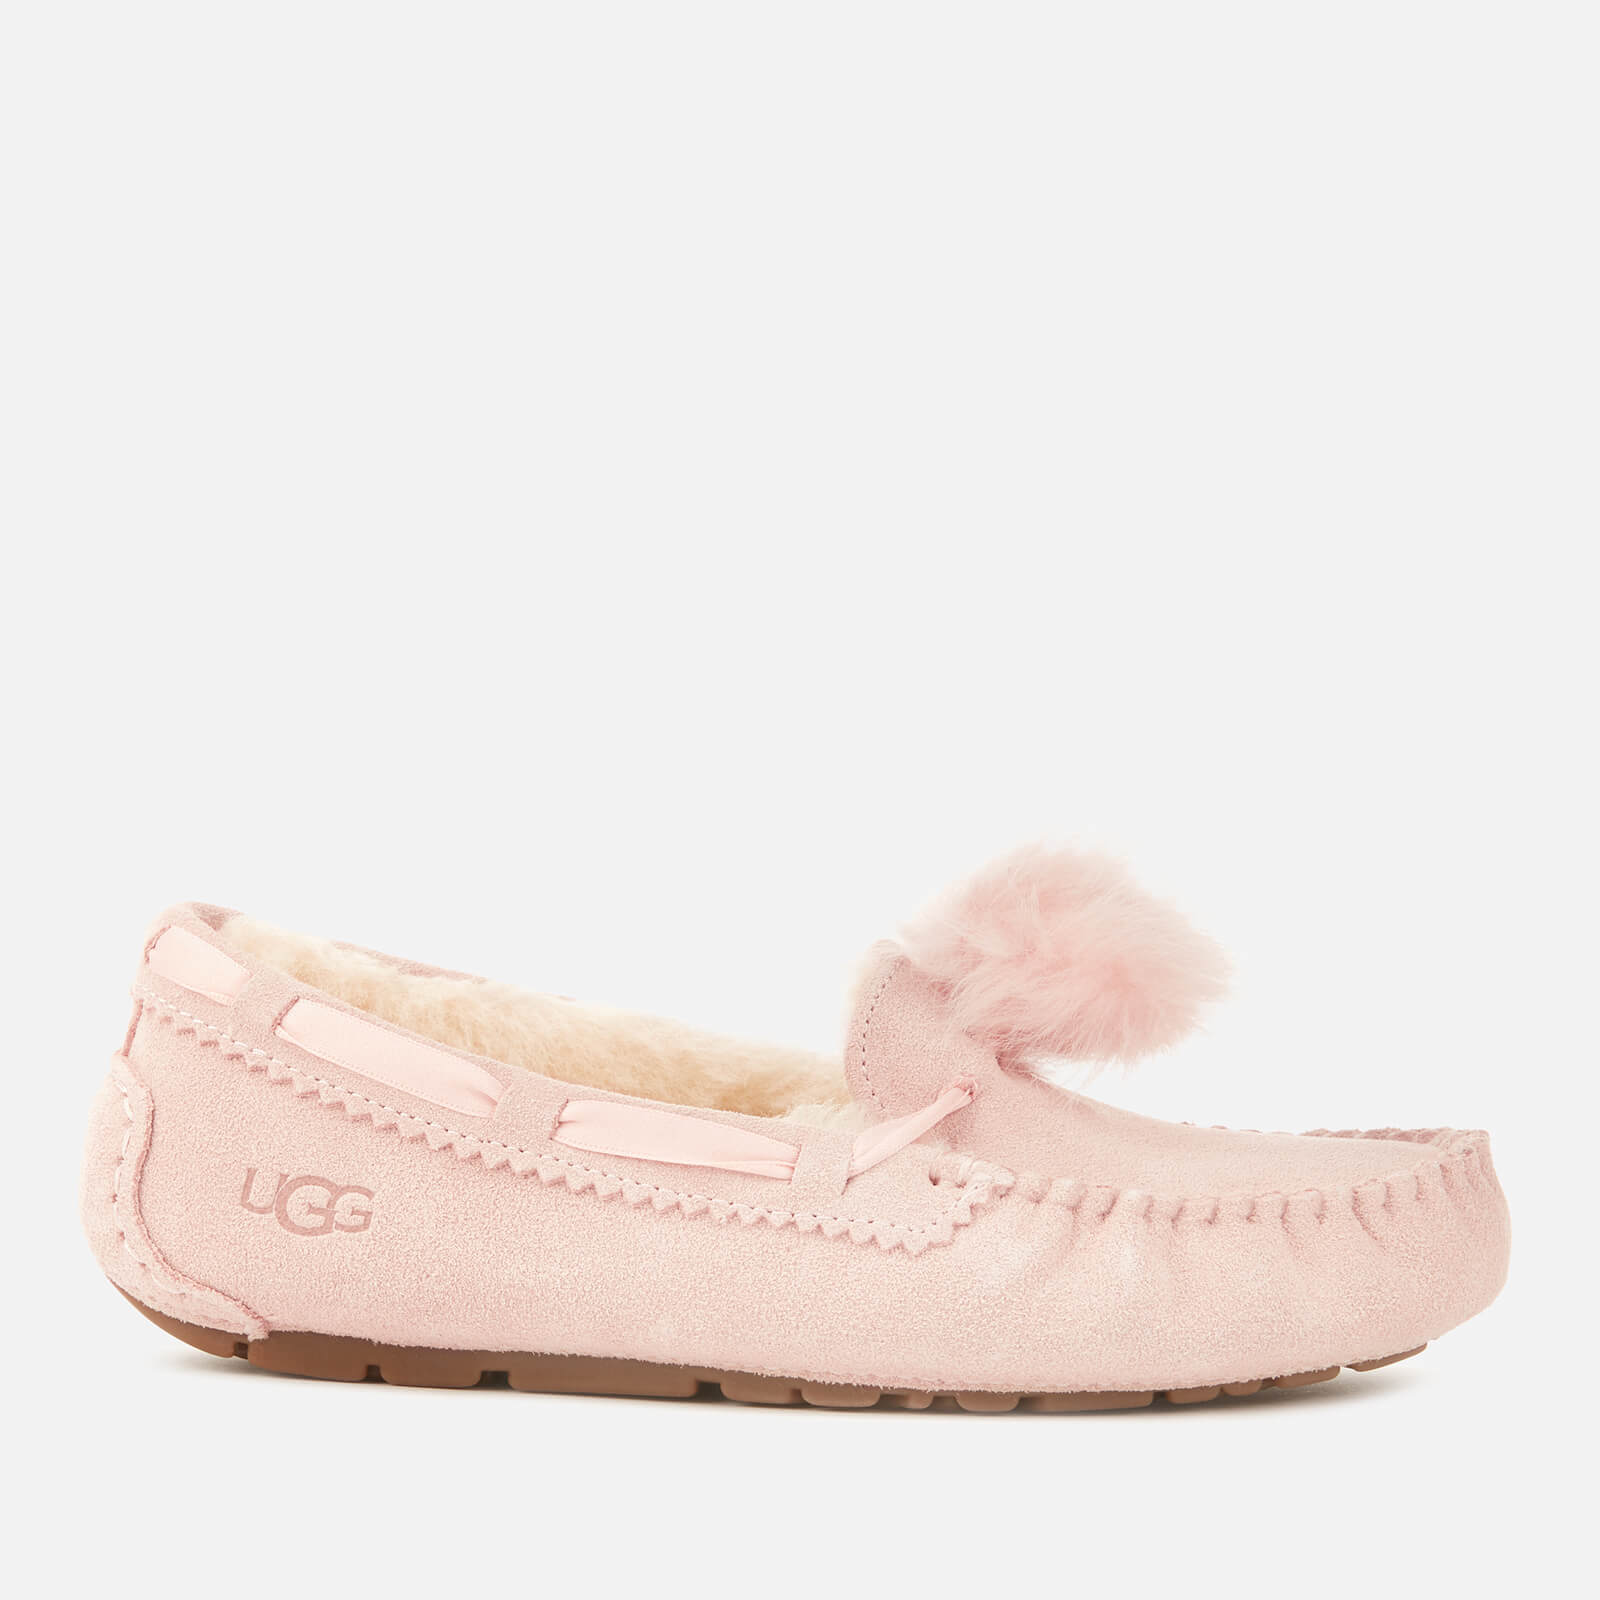 pink ugg moccasin slippers